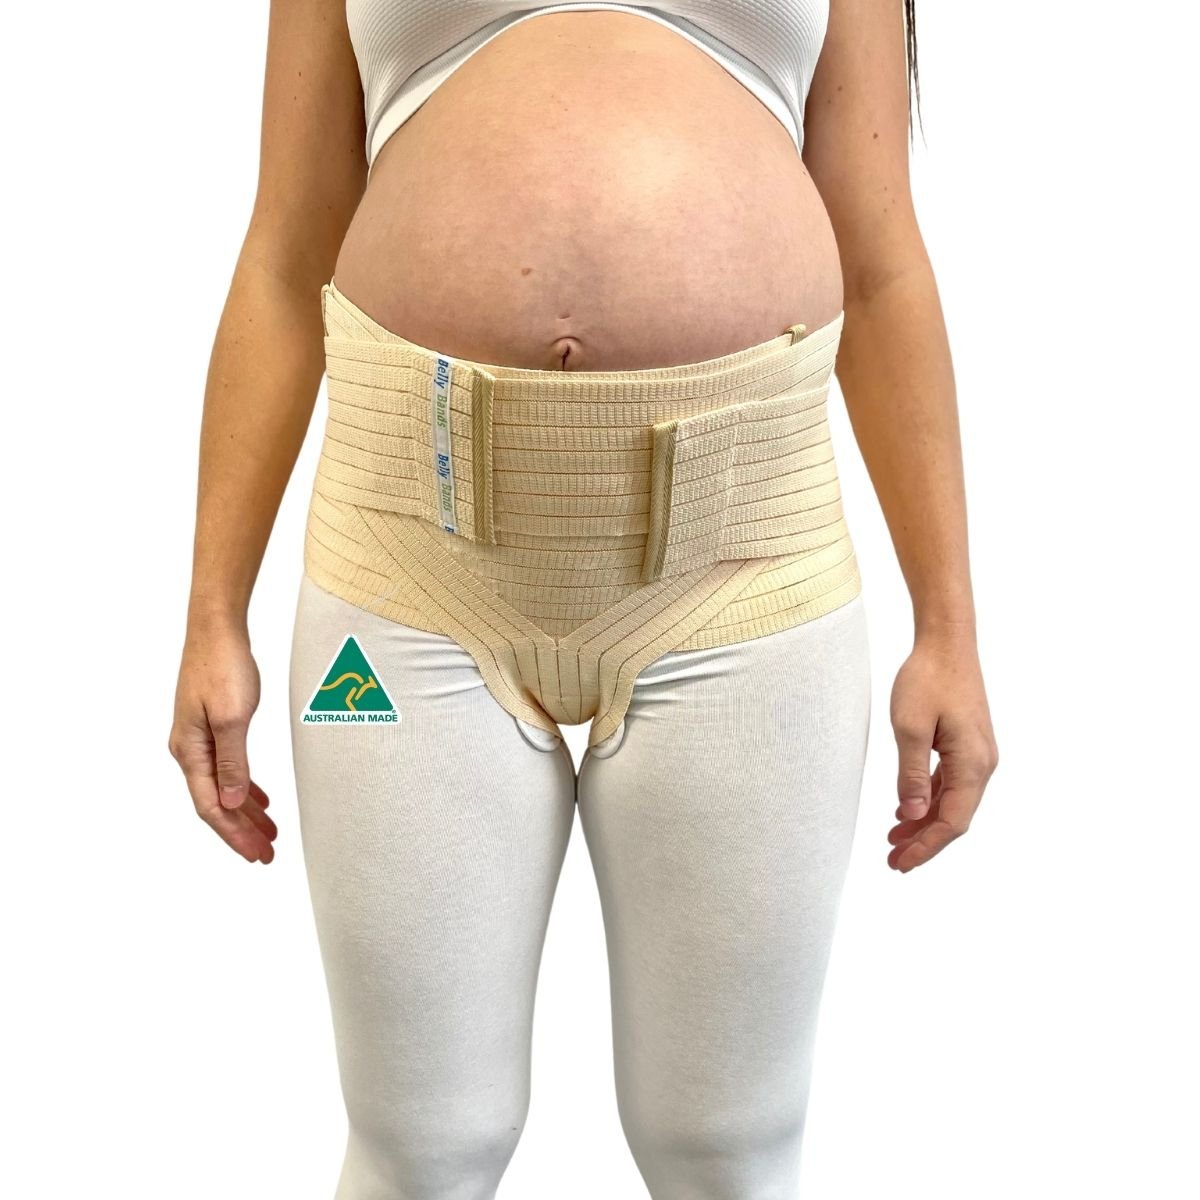 Vulva Support Attachment (for Belly Band) - Belly Bands